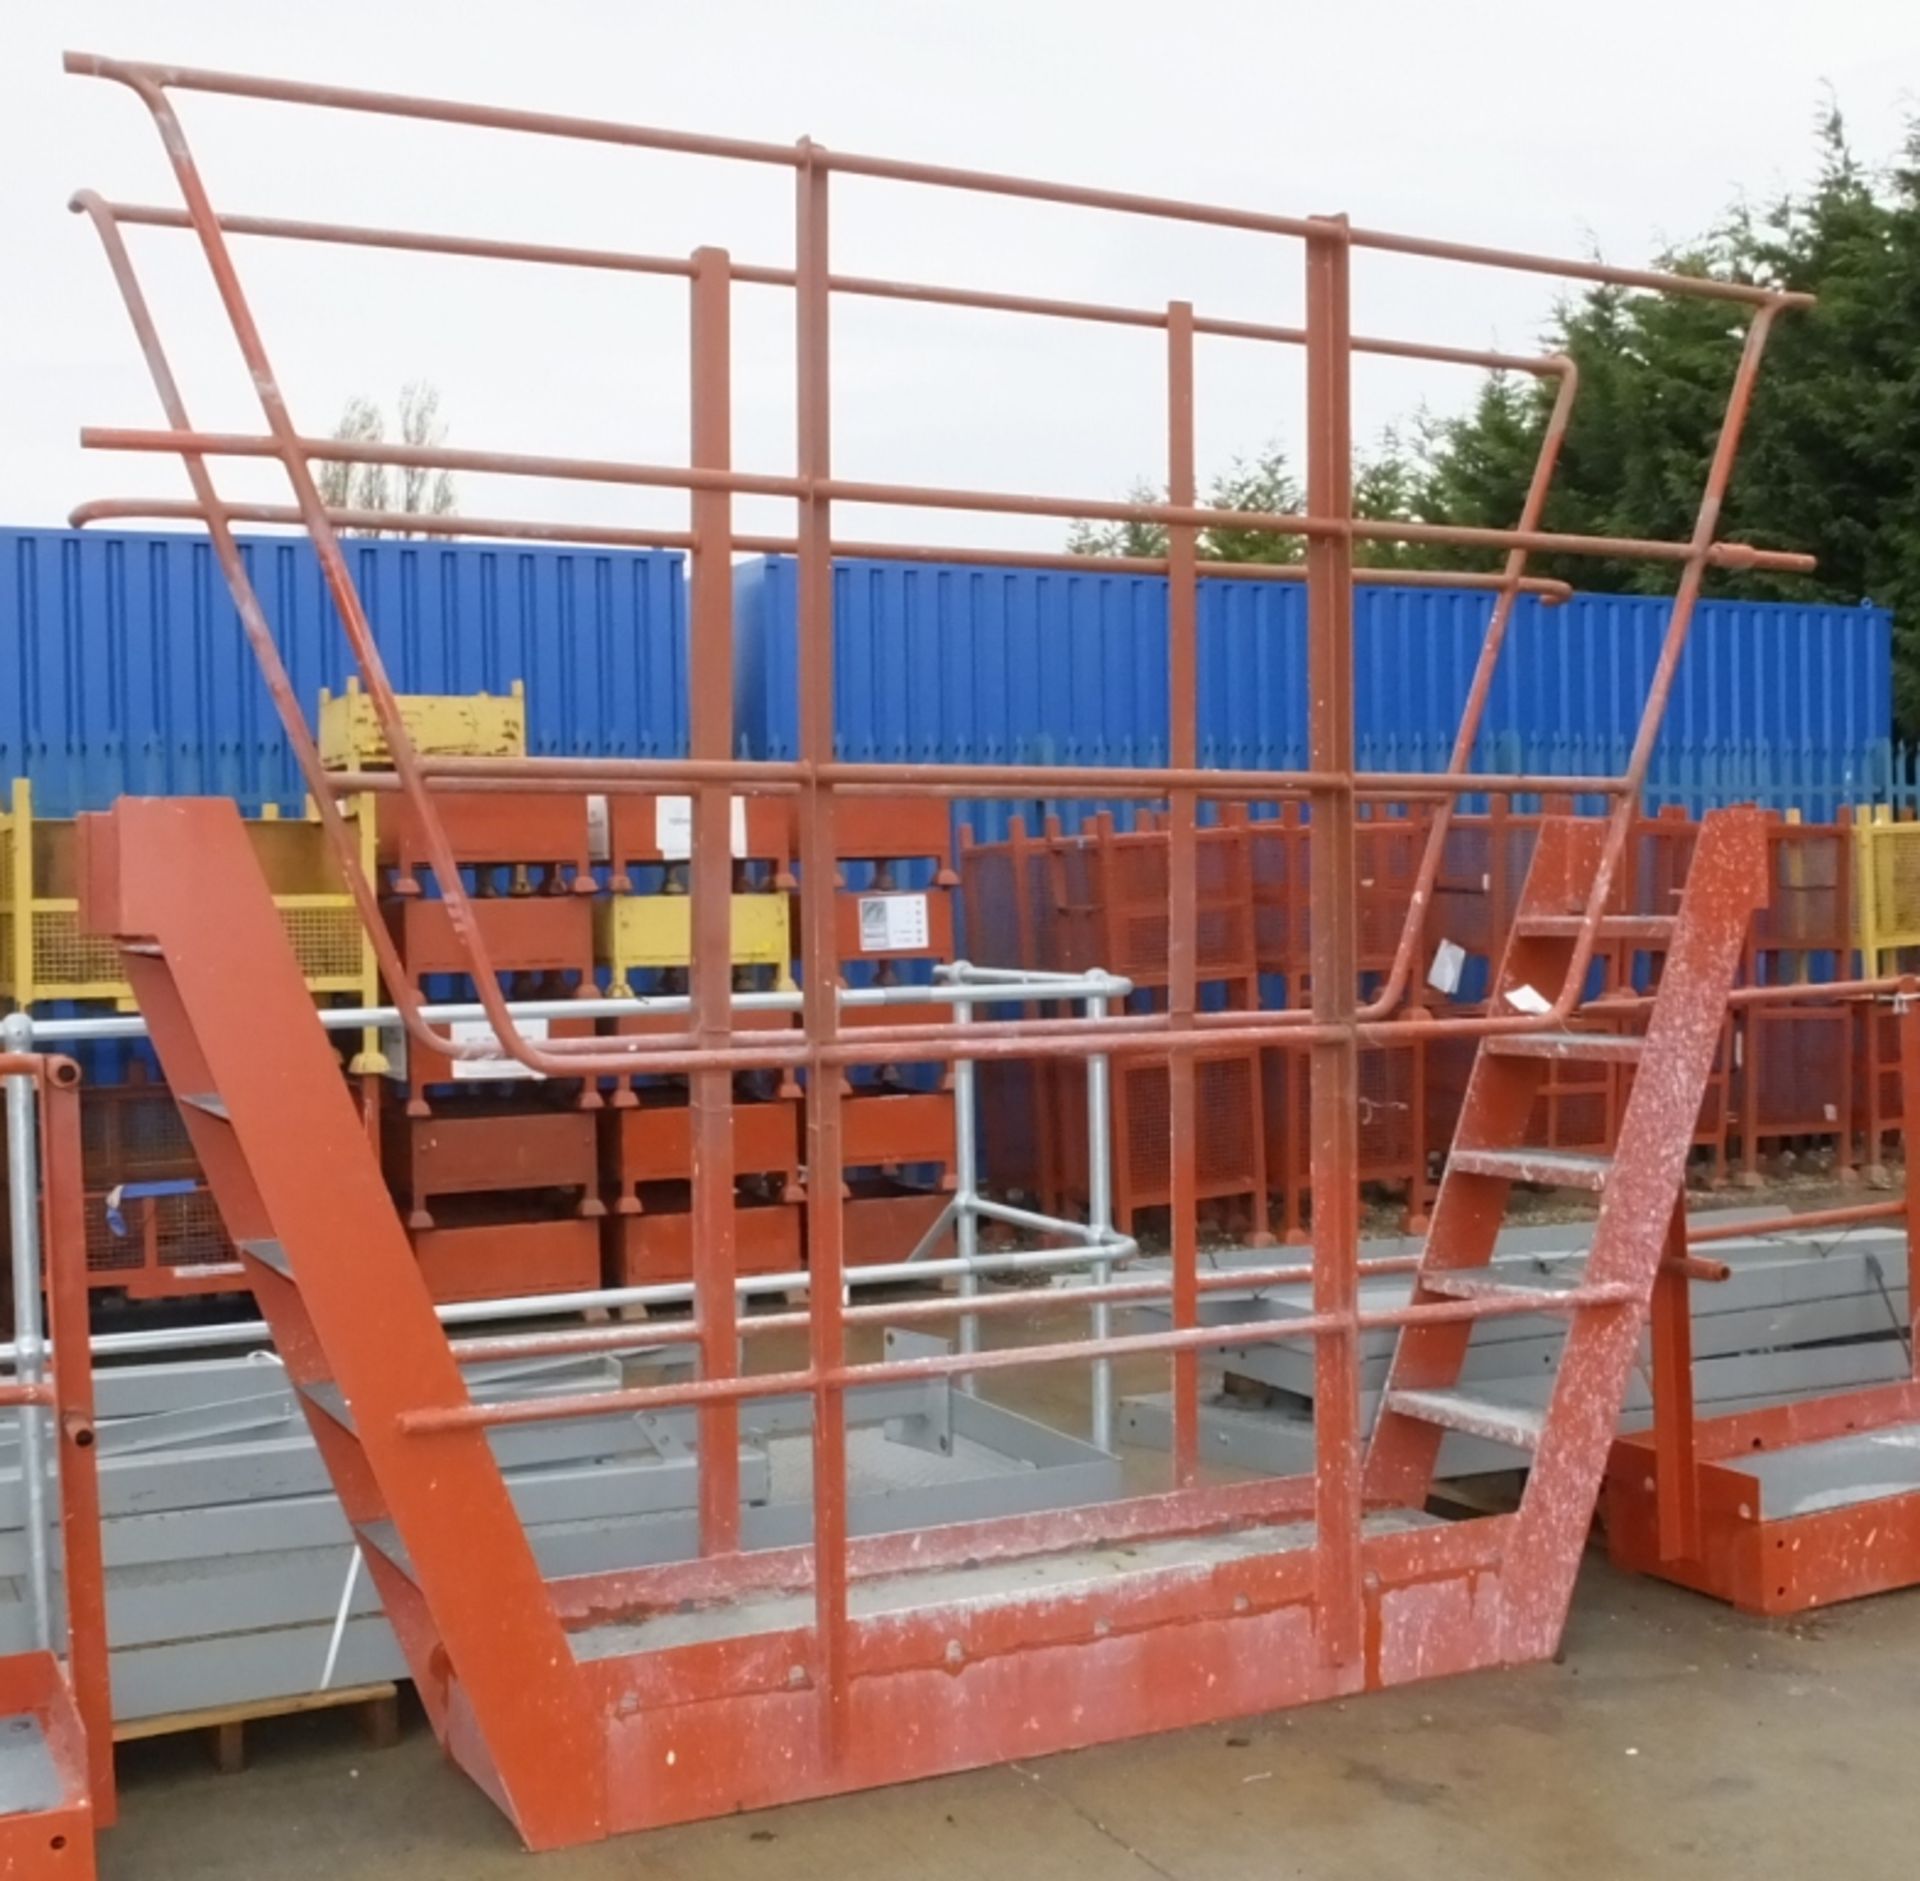 Walkway assembly - frames, legs, handrails - Full lorry load AT LEAST - Please note there - Image 7 of 13